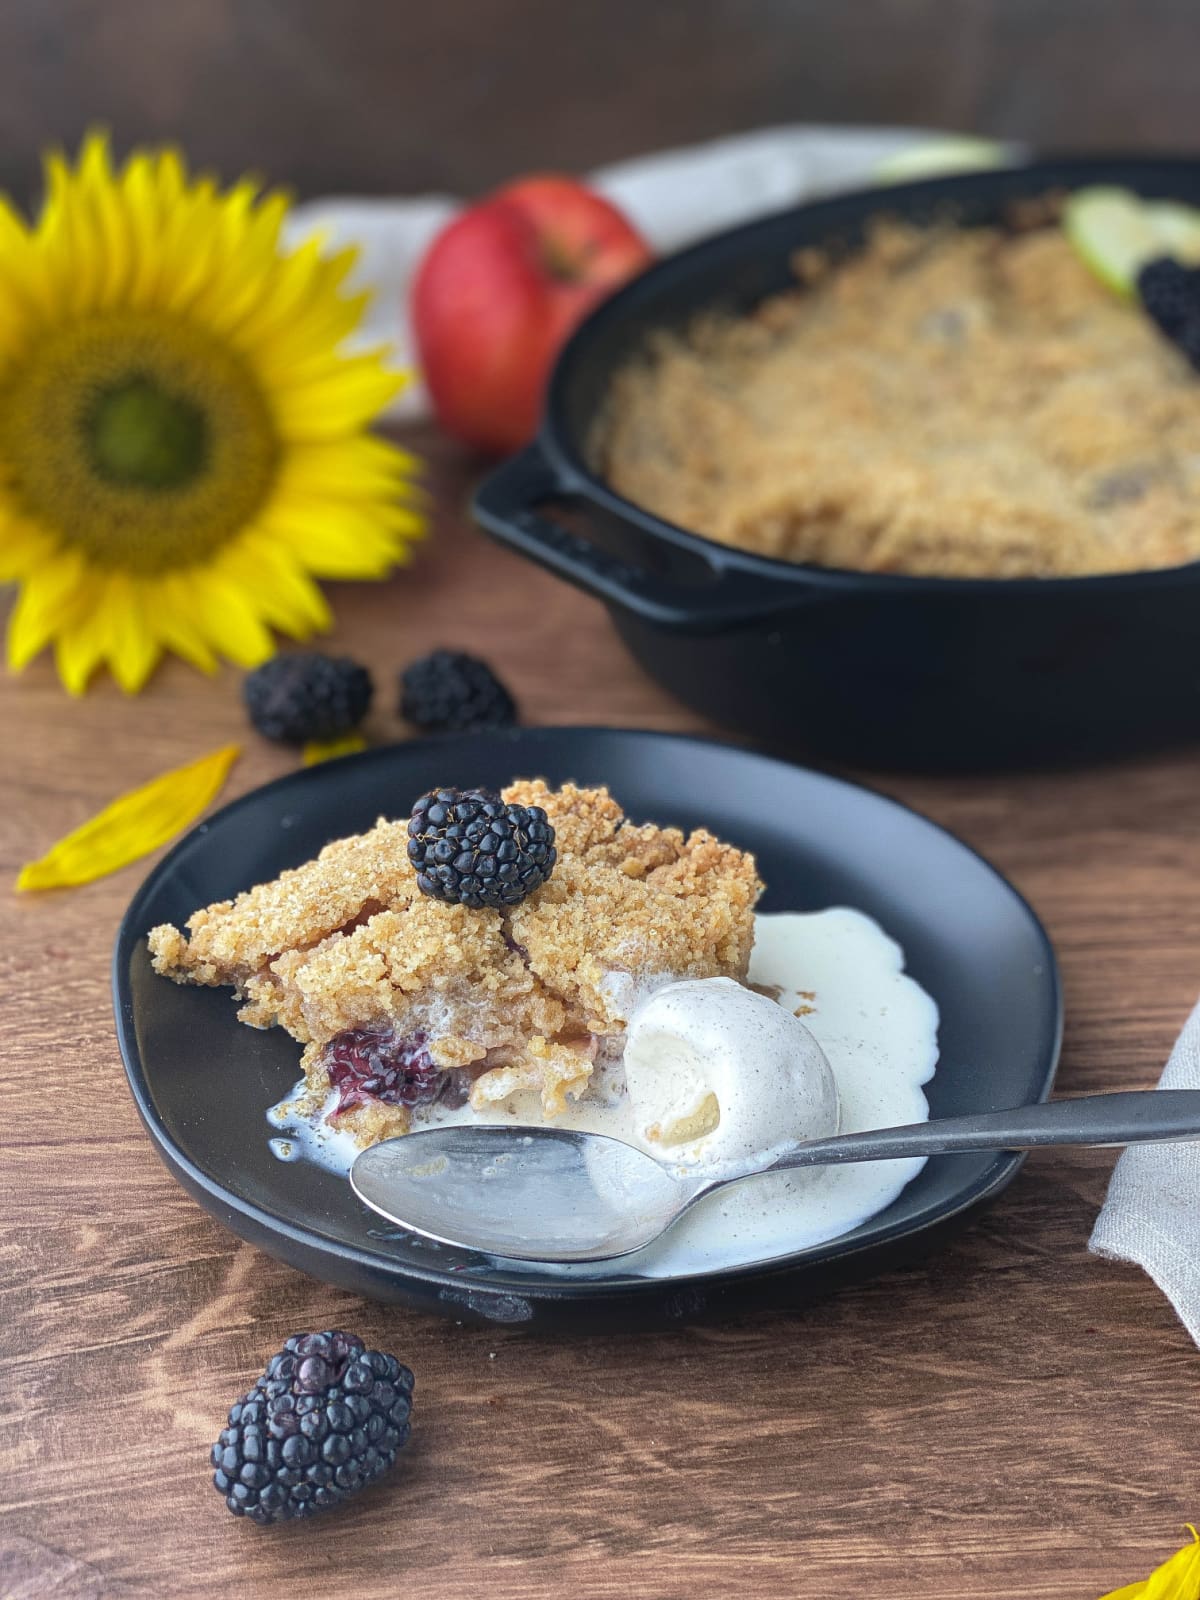 Blackberry and Apple Crumble on a black plate with a scoop of vanilla ice cream and a silver spoon.